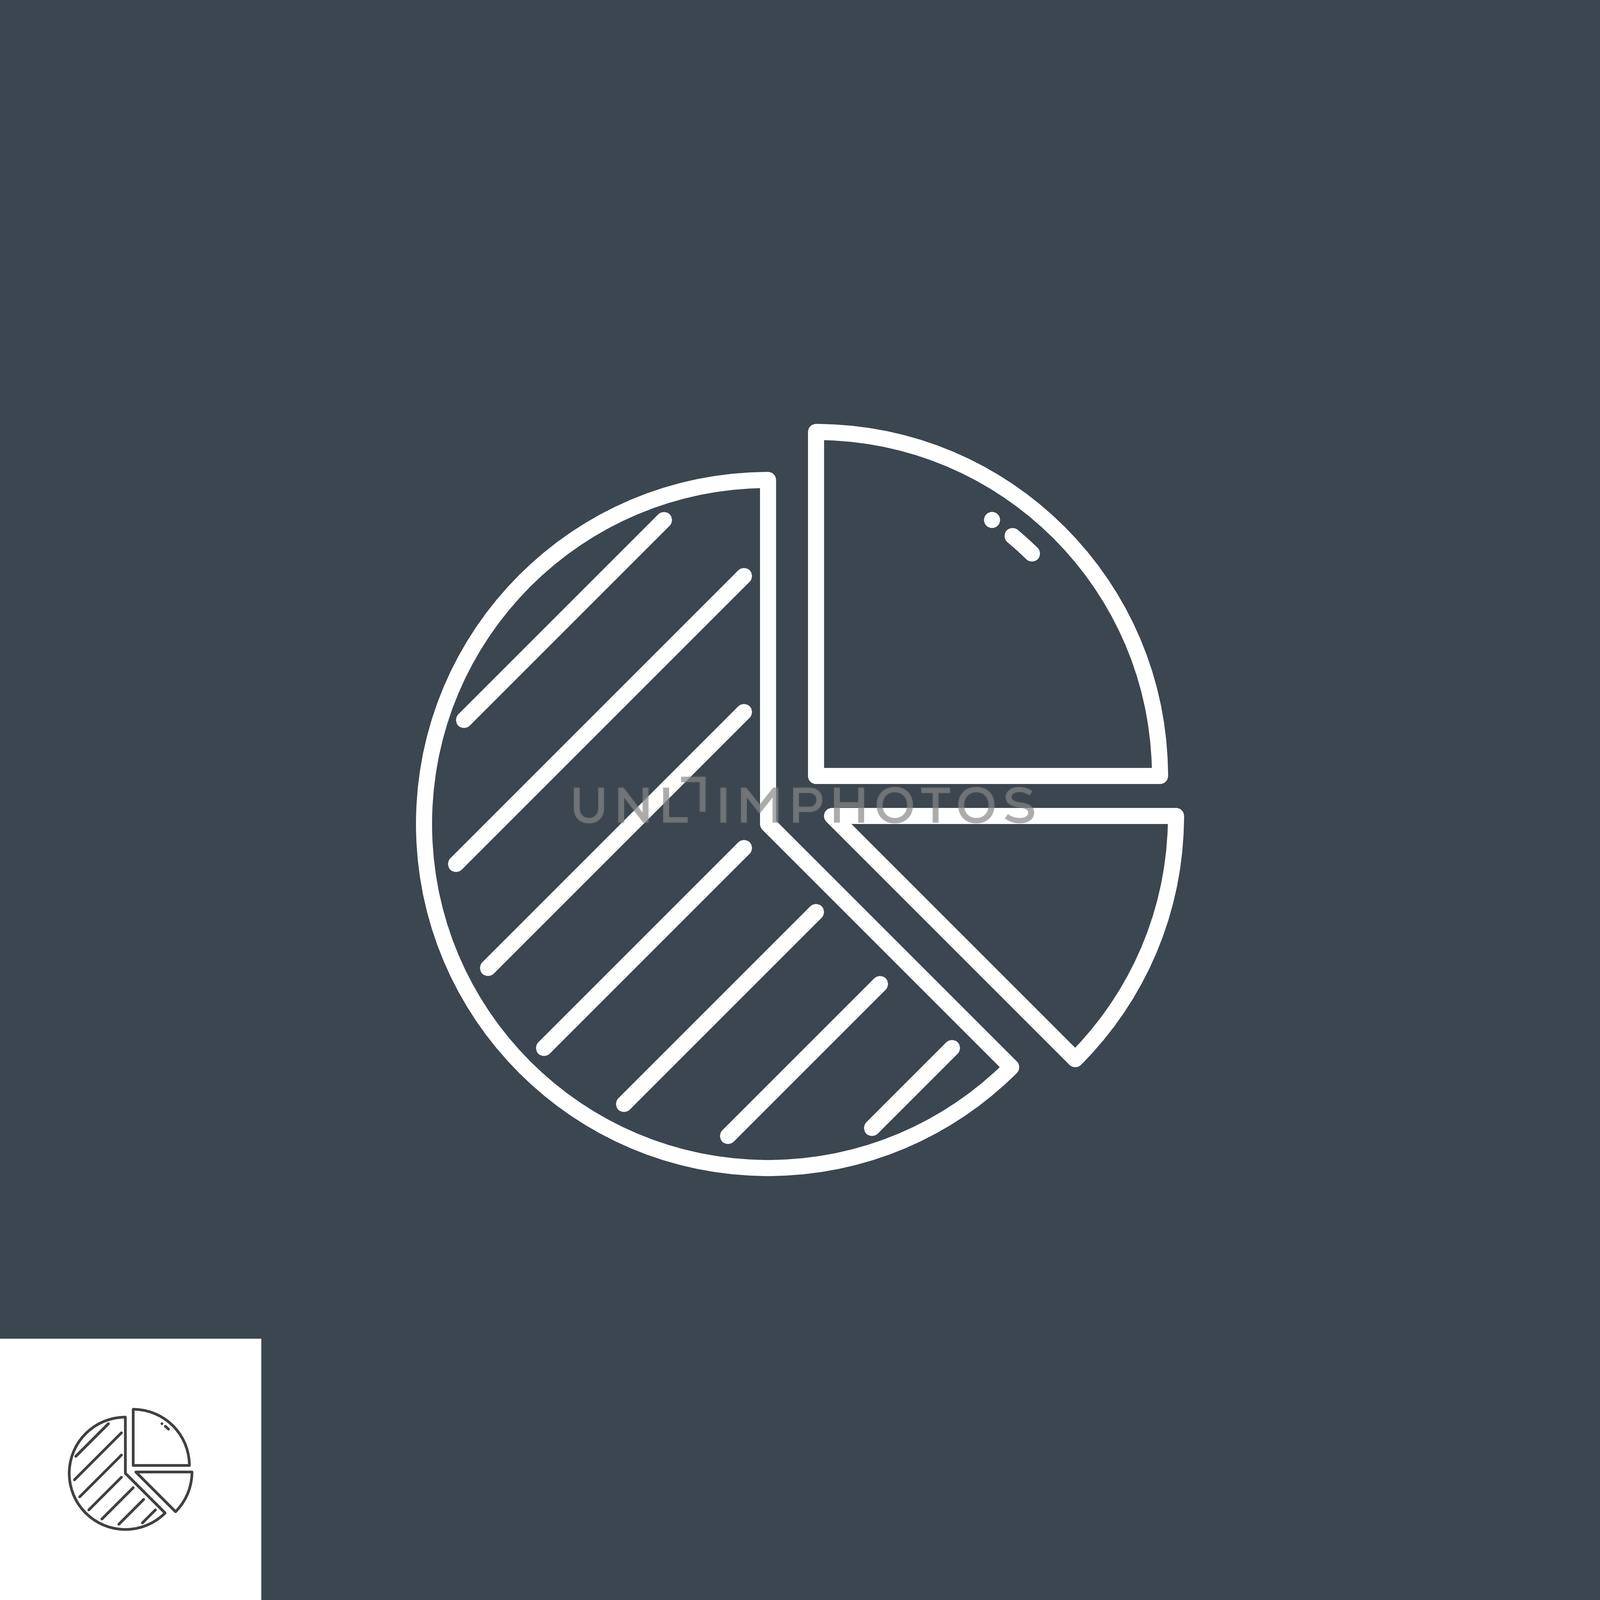 Pie Chart Related Vector Line Icon. Isolated on Black Background. Editable Stroke.